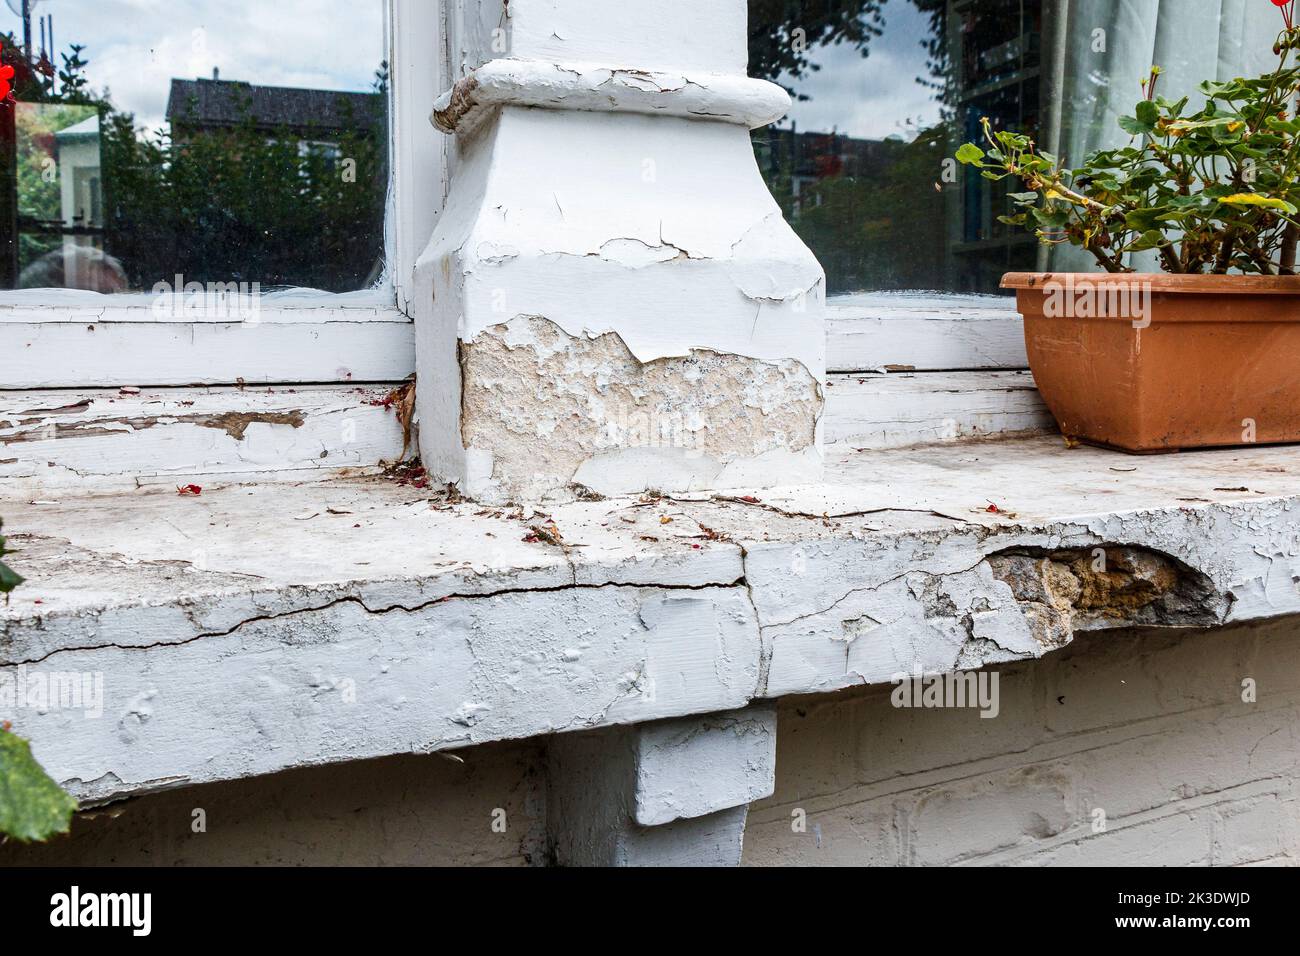 A wooden window frame and windosill in a state of disrepair in a Victorian residential property in London, UK Stock Photo